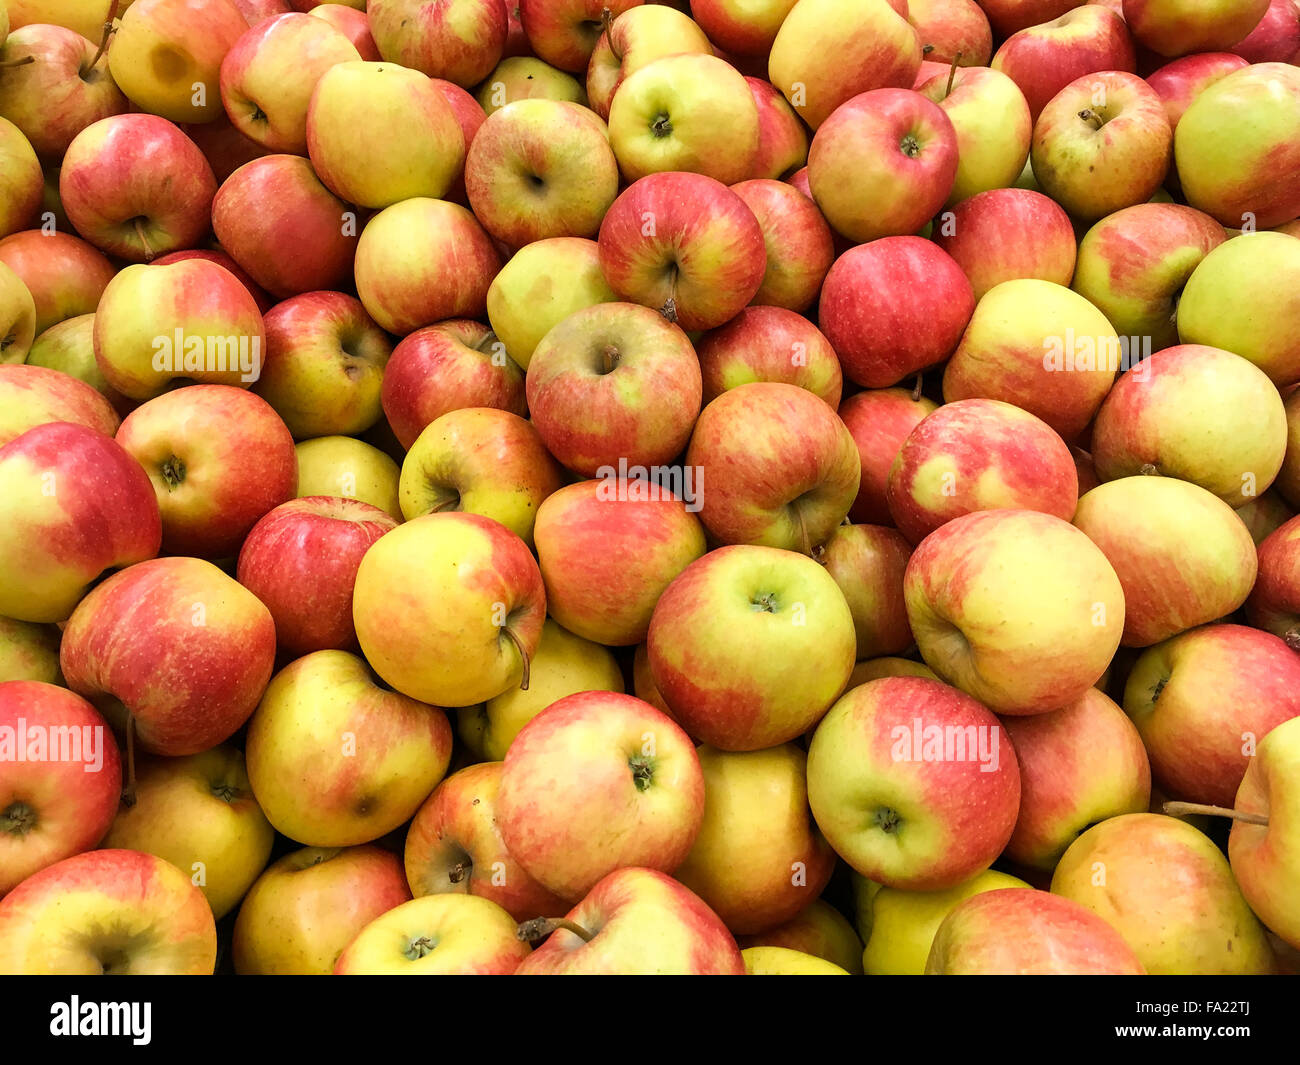 Close Up Of Green Apples In Market Display Stock Photo